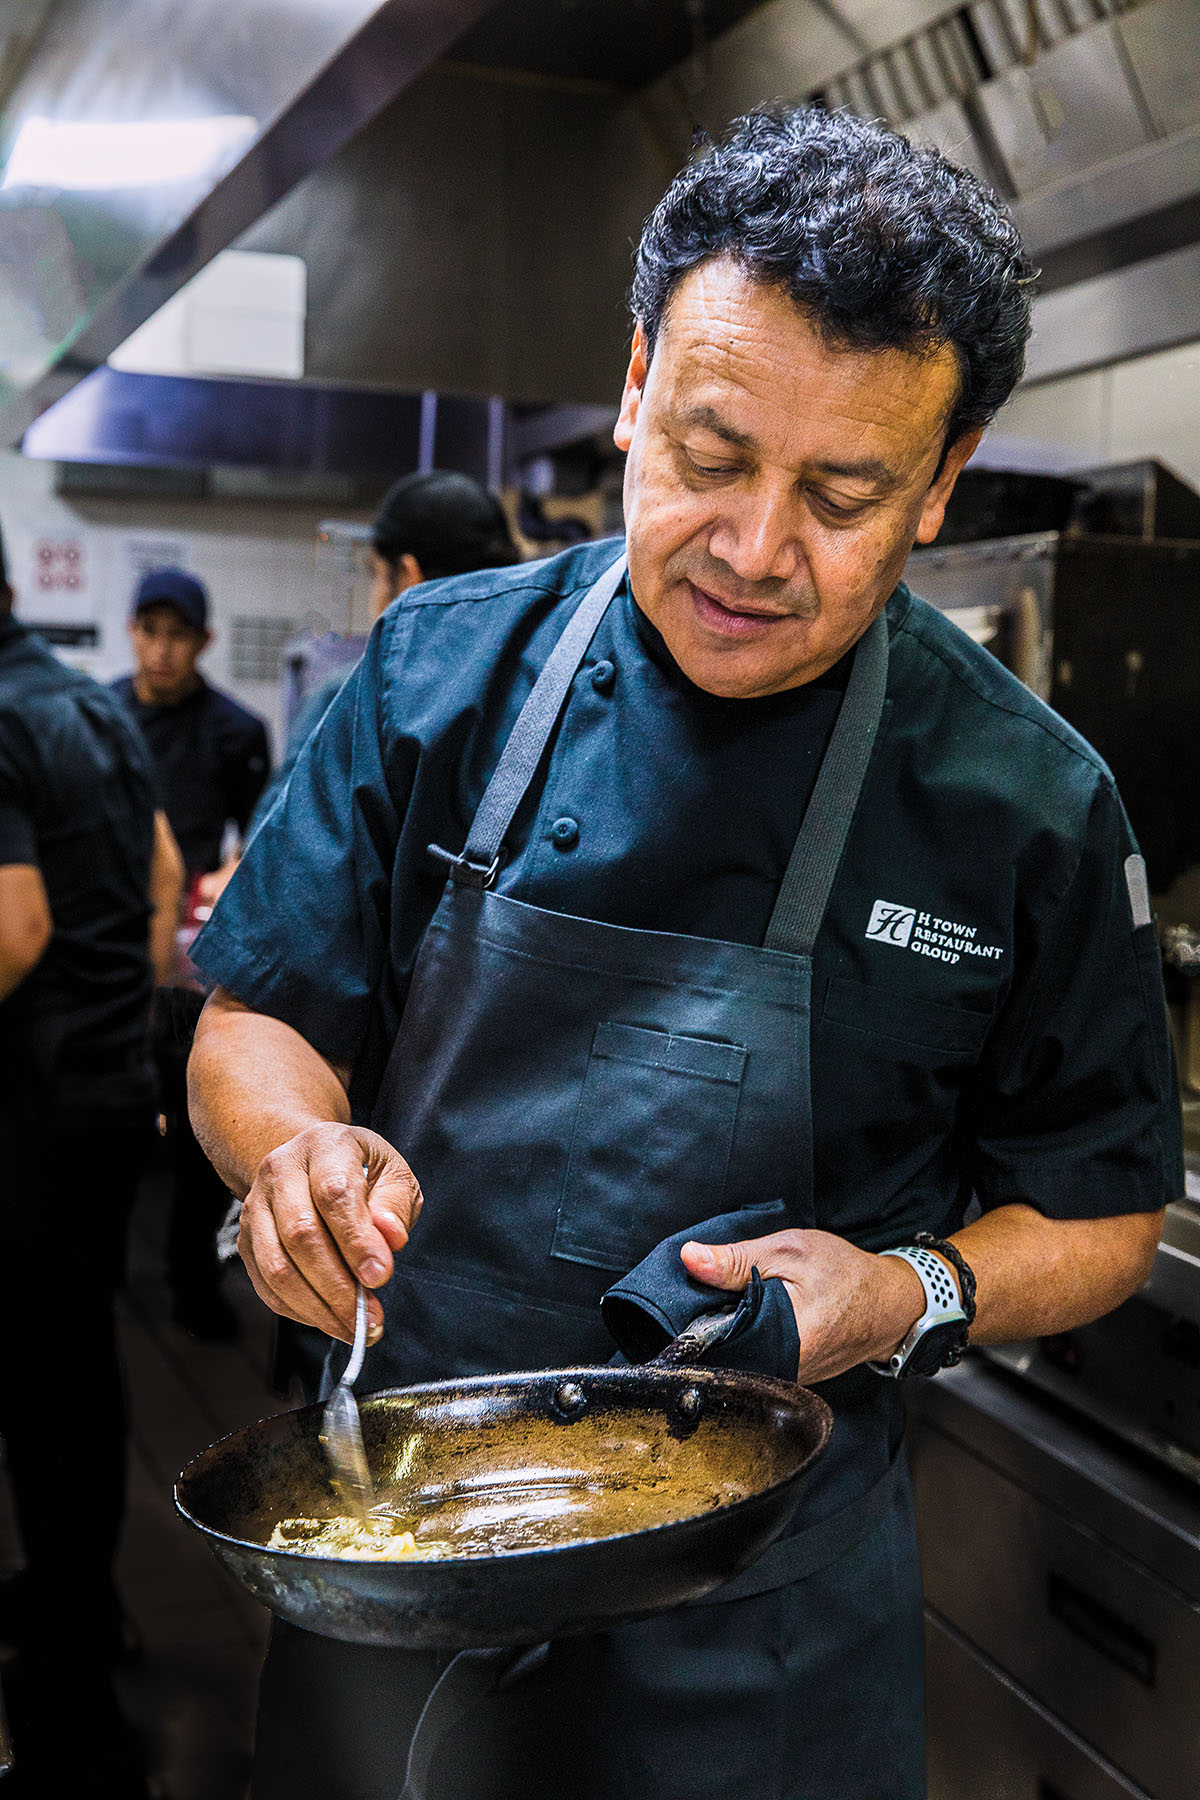 A chef wearing a dark blue apron mixes a sauce in a pan